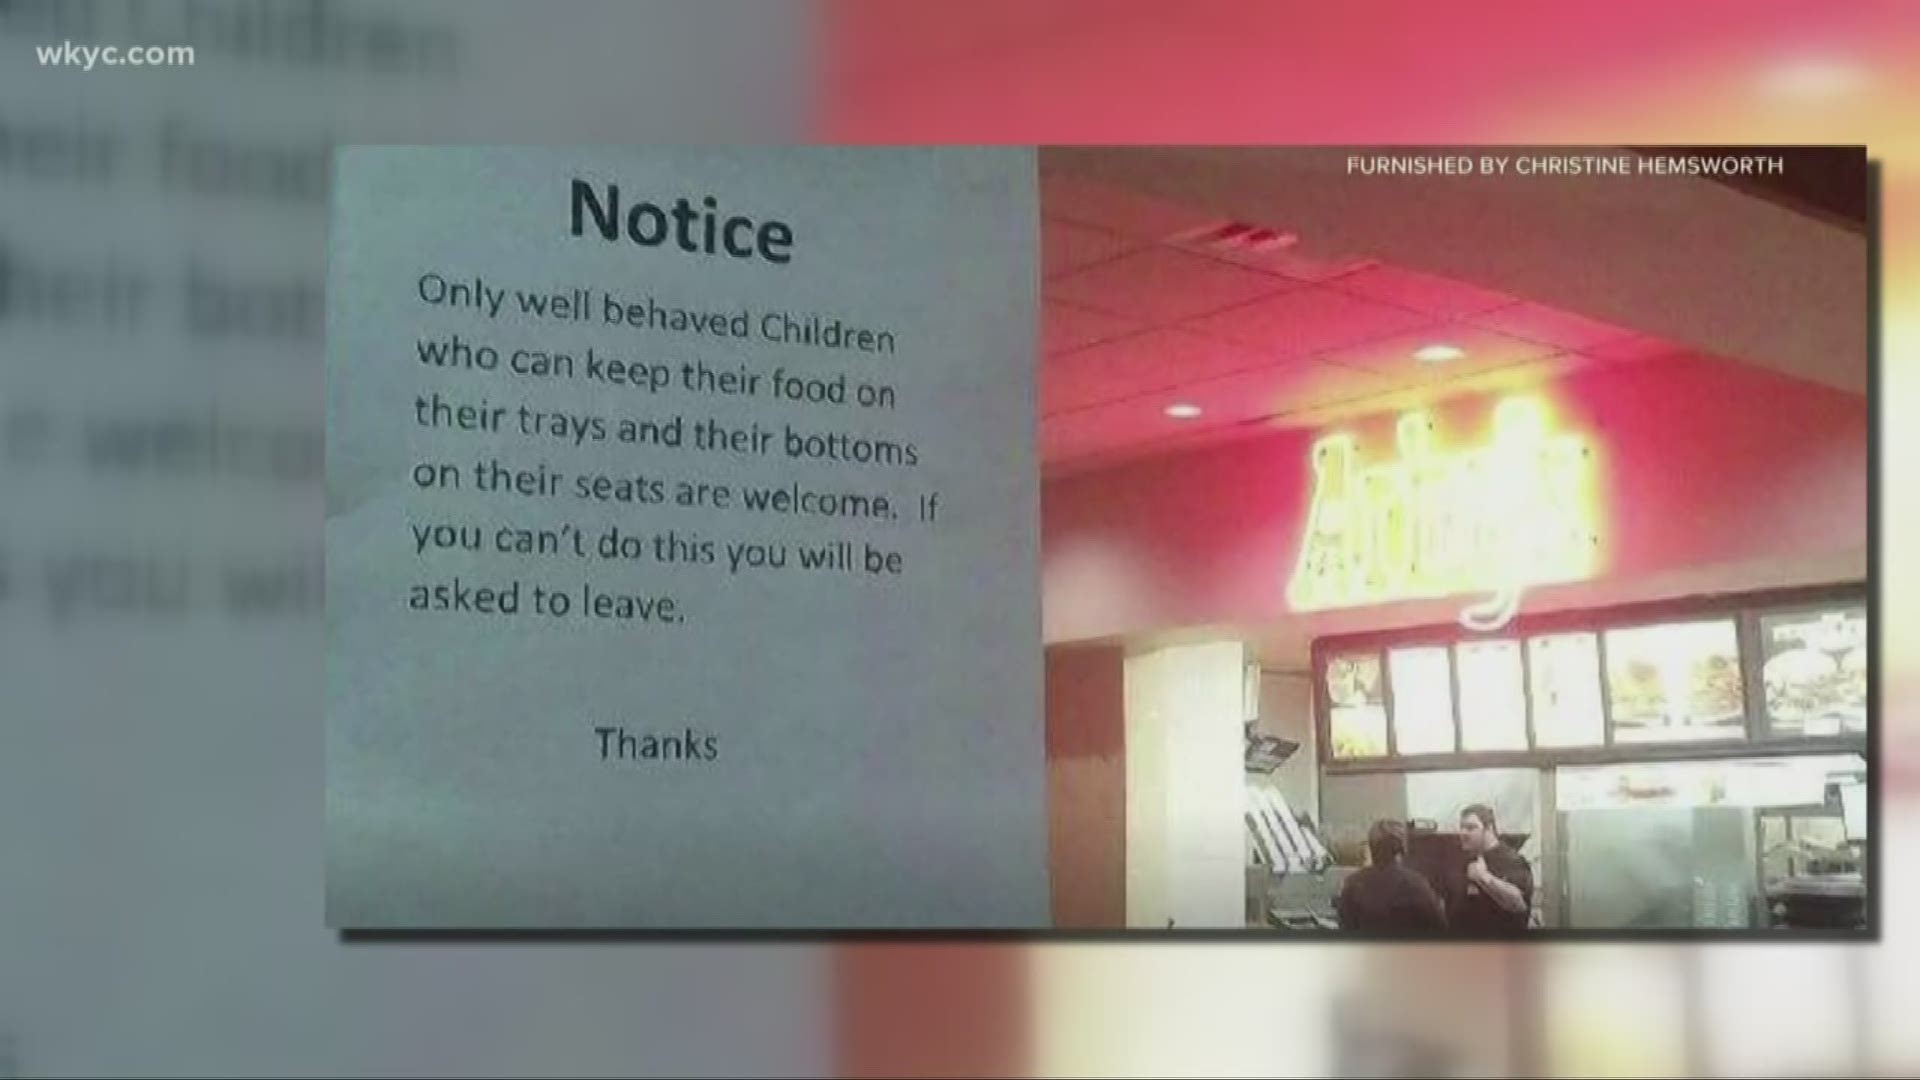 An Arby's in Minnesota posted a sign on their door that said they will only serve well-behaved children and those that can't behave, will be asked to leave.